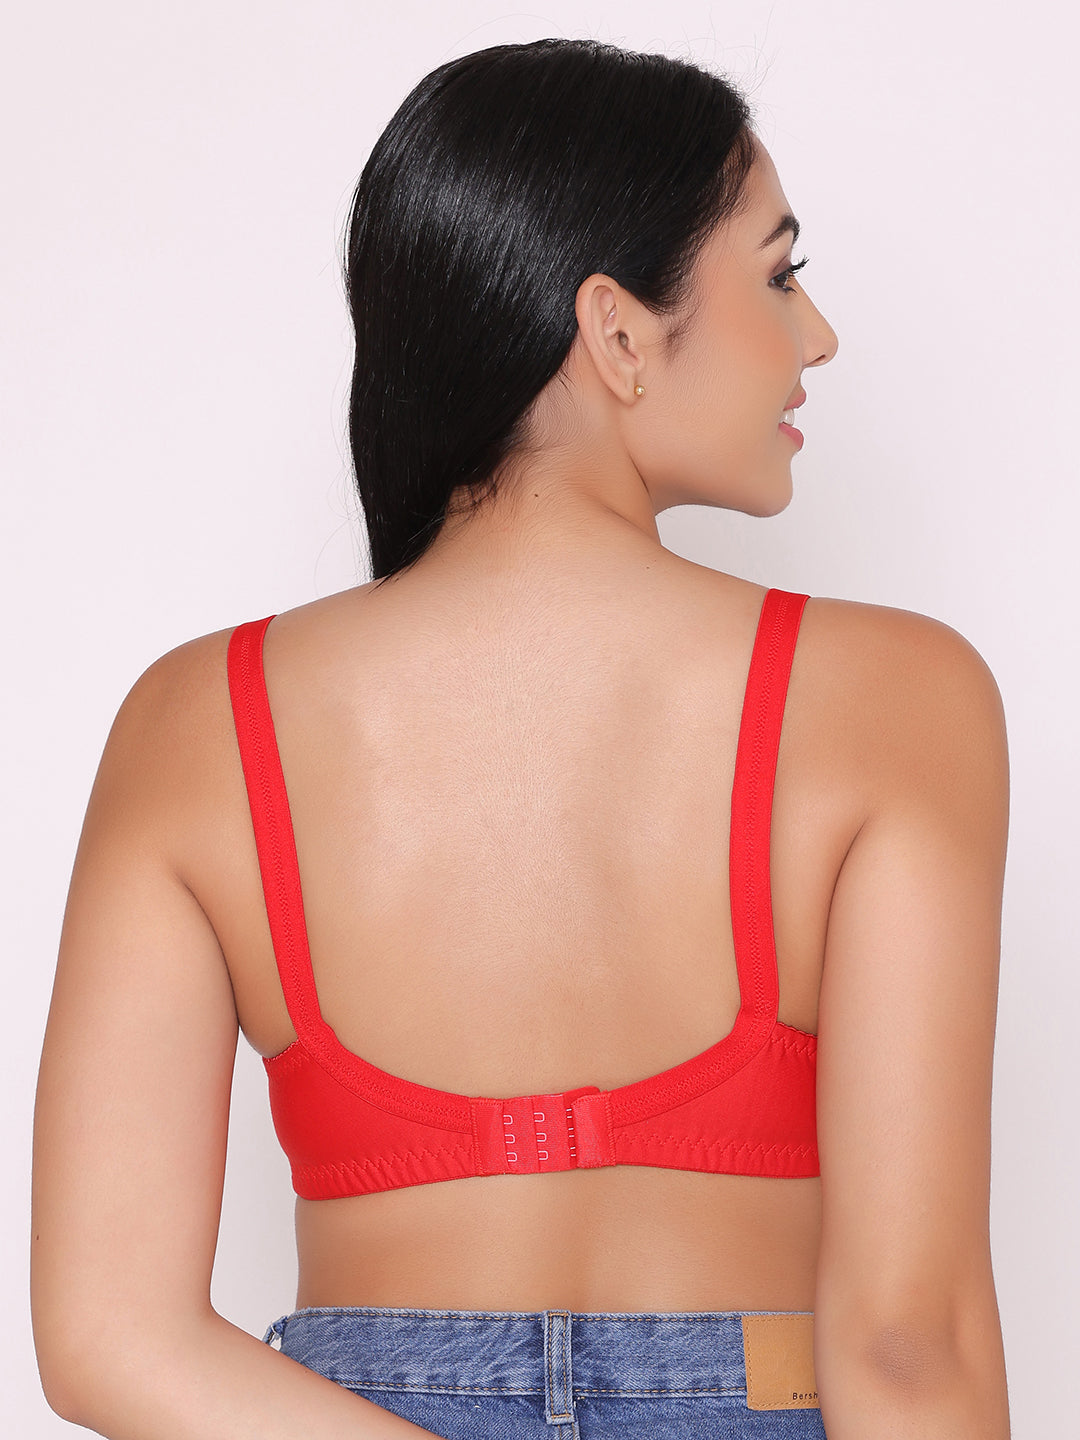 Full Coverage Bras for daily use for women in India